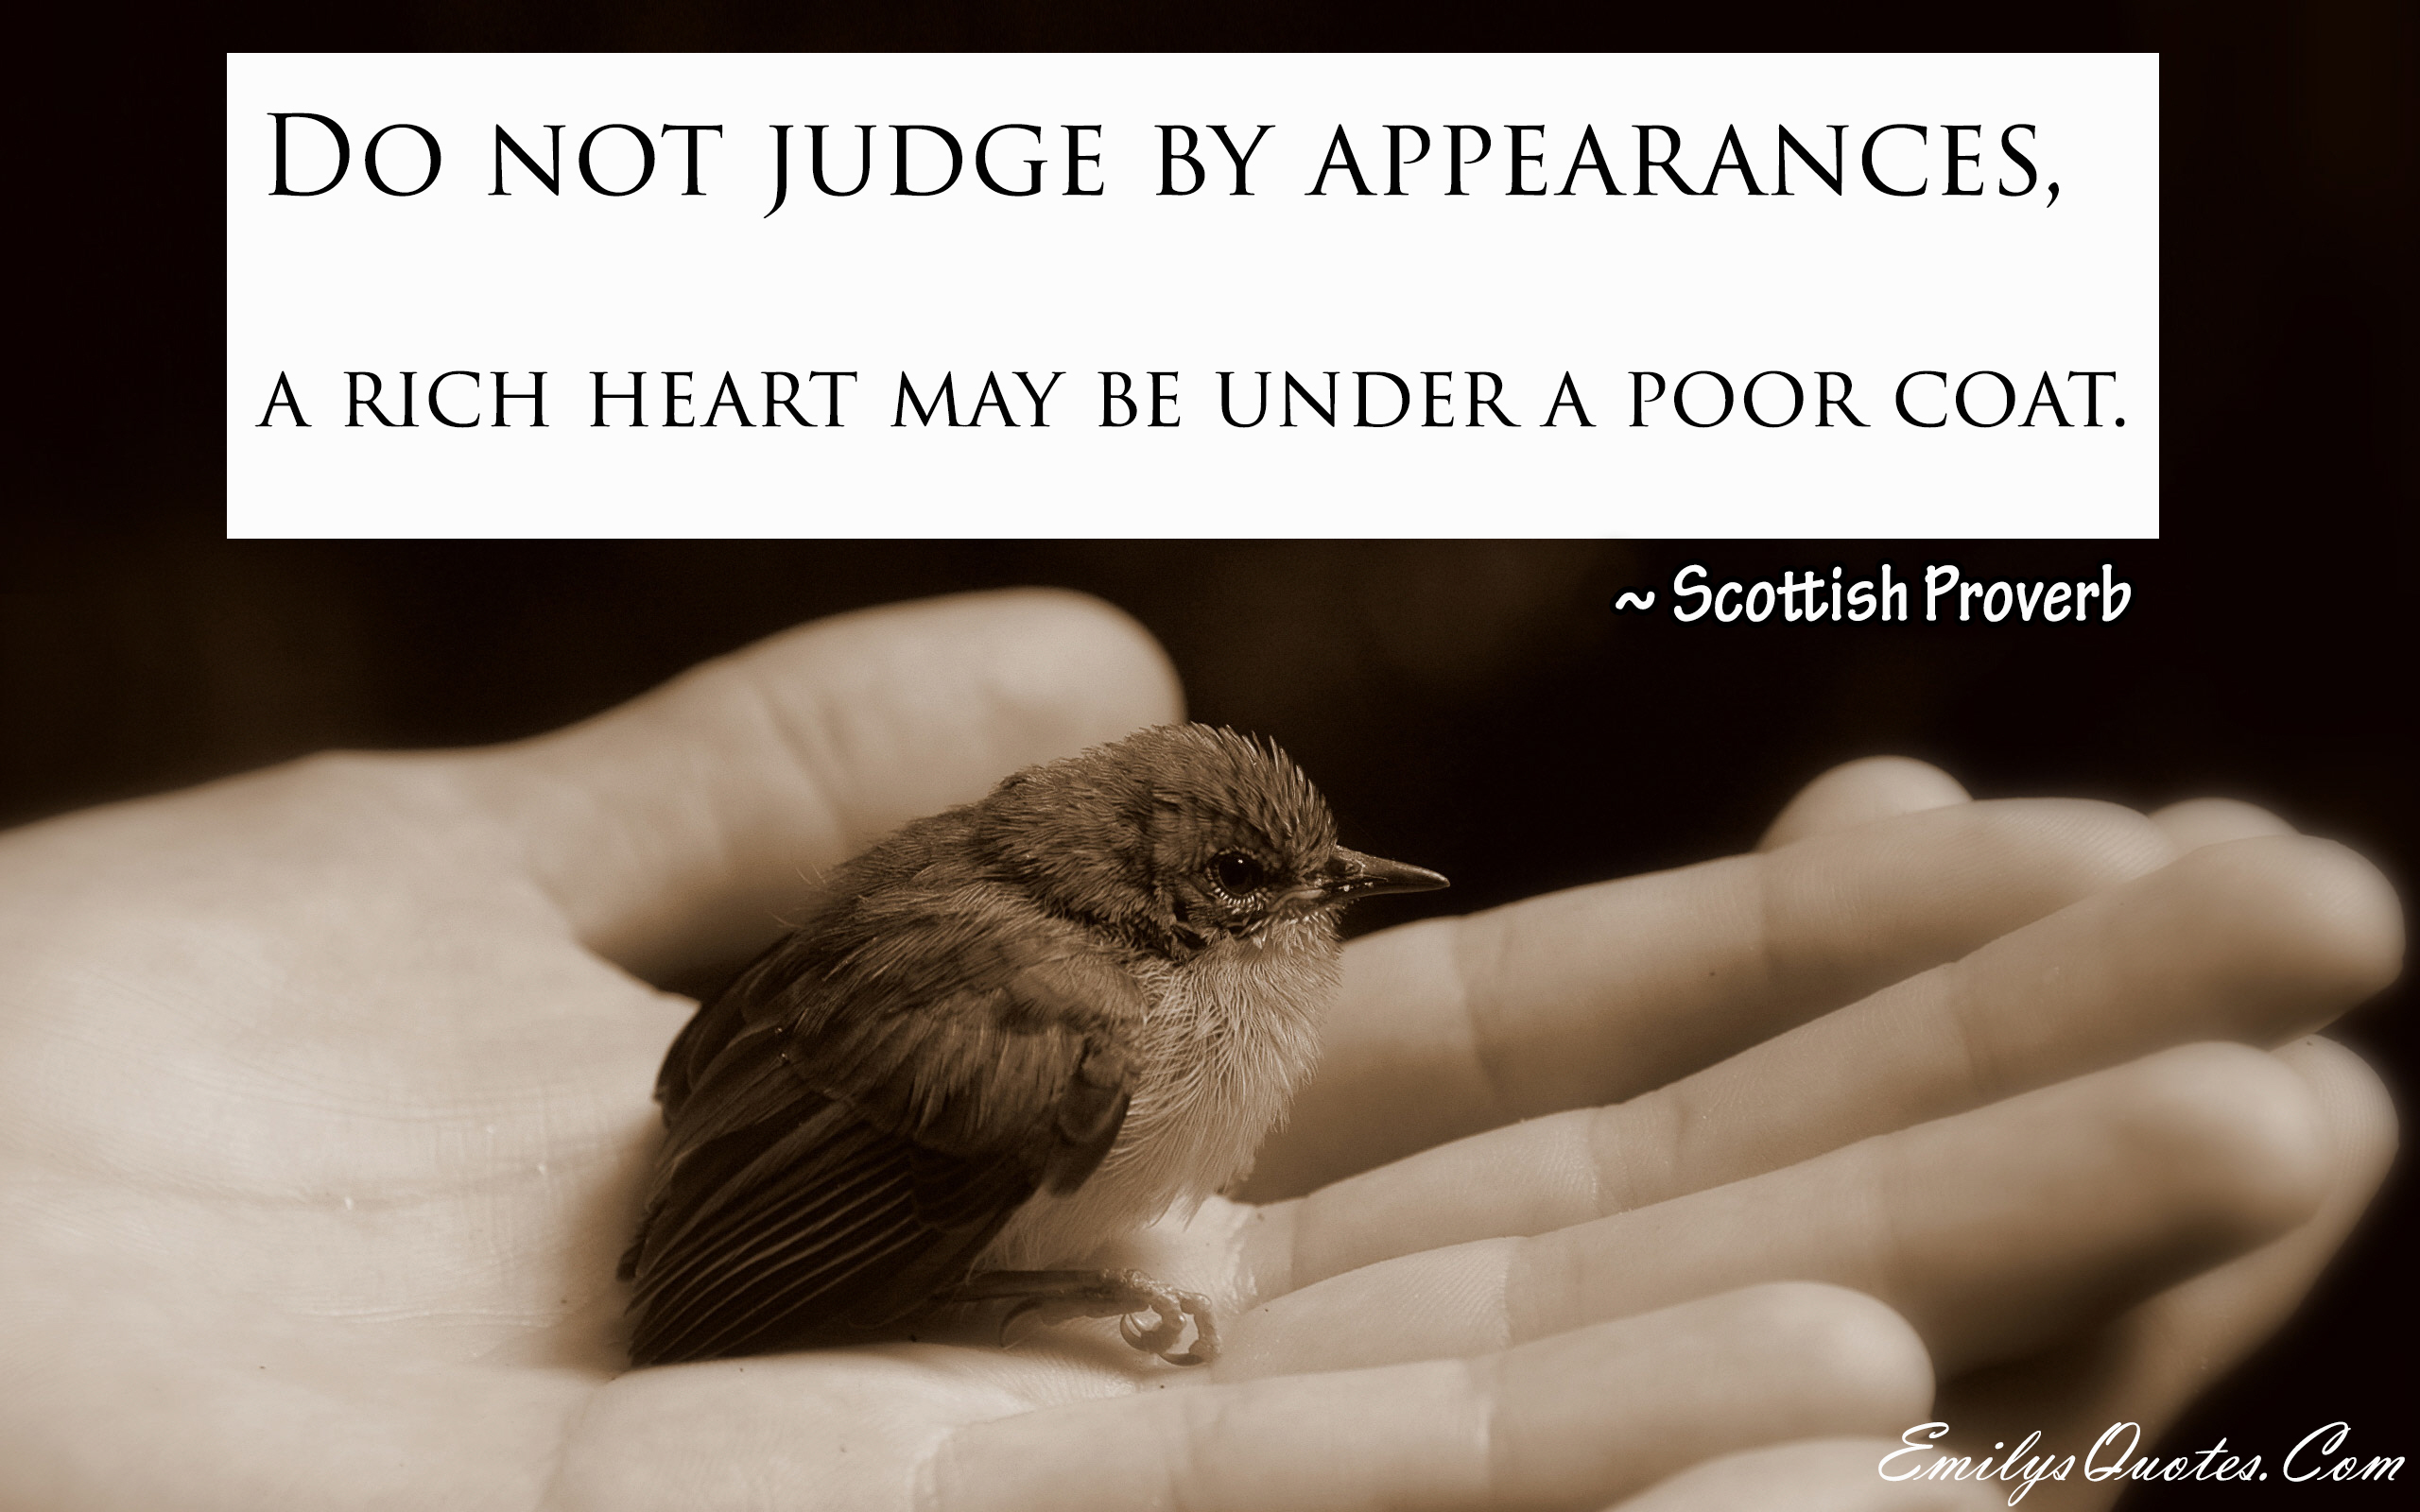 Do not judge by appearances, a rich Heart may be under a poor coat